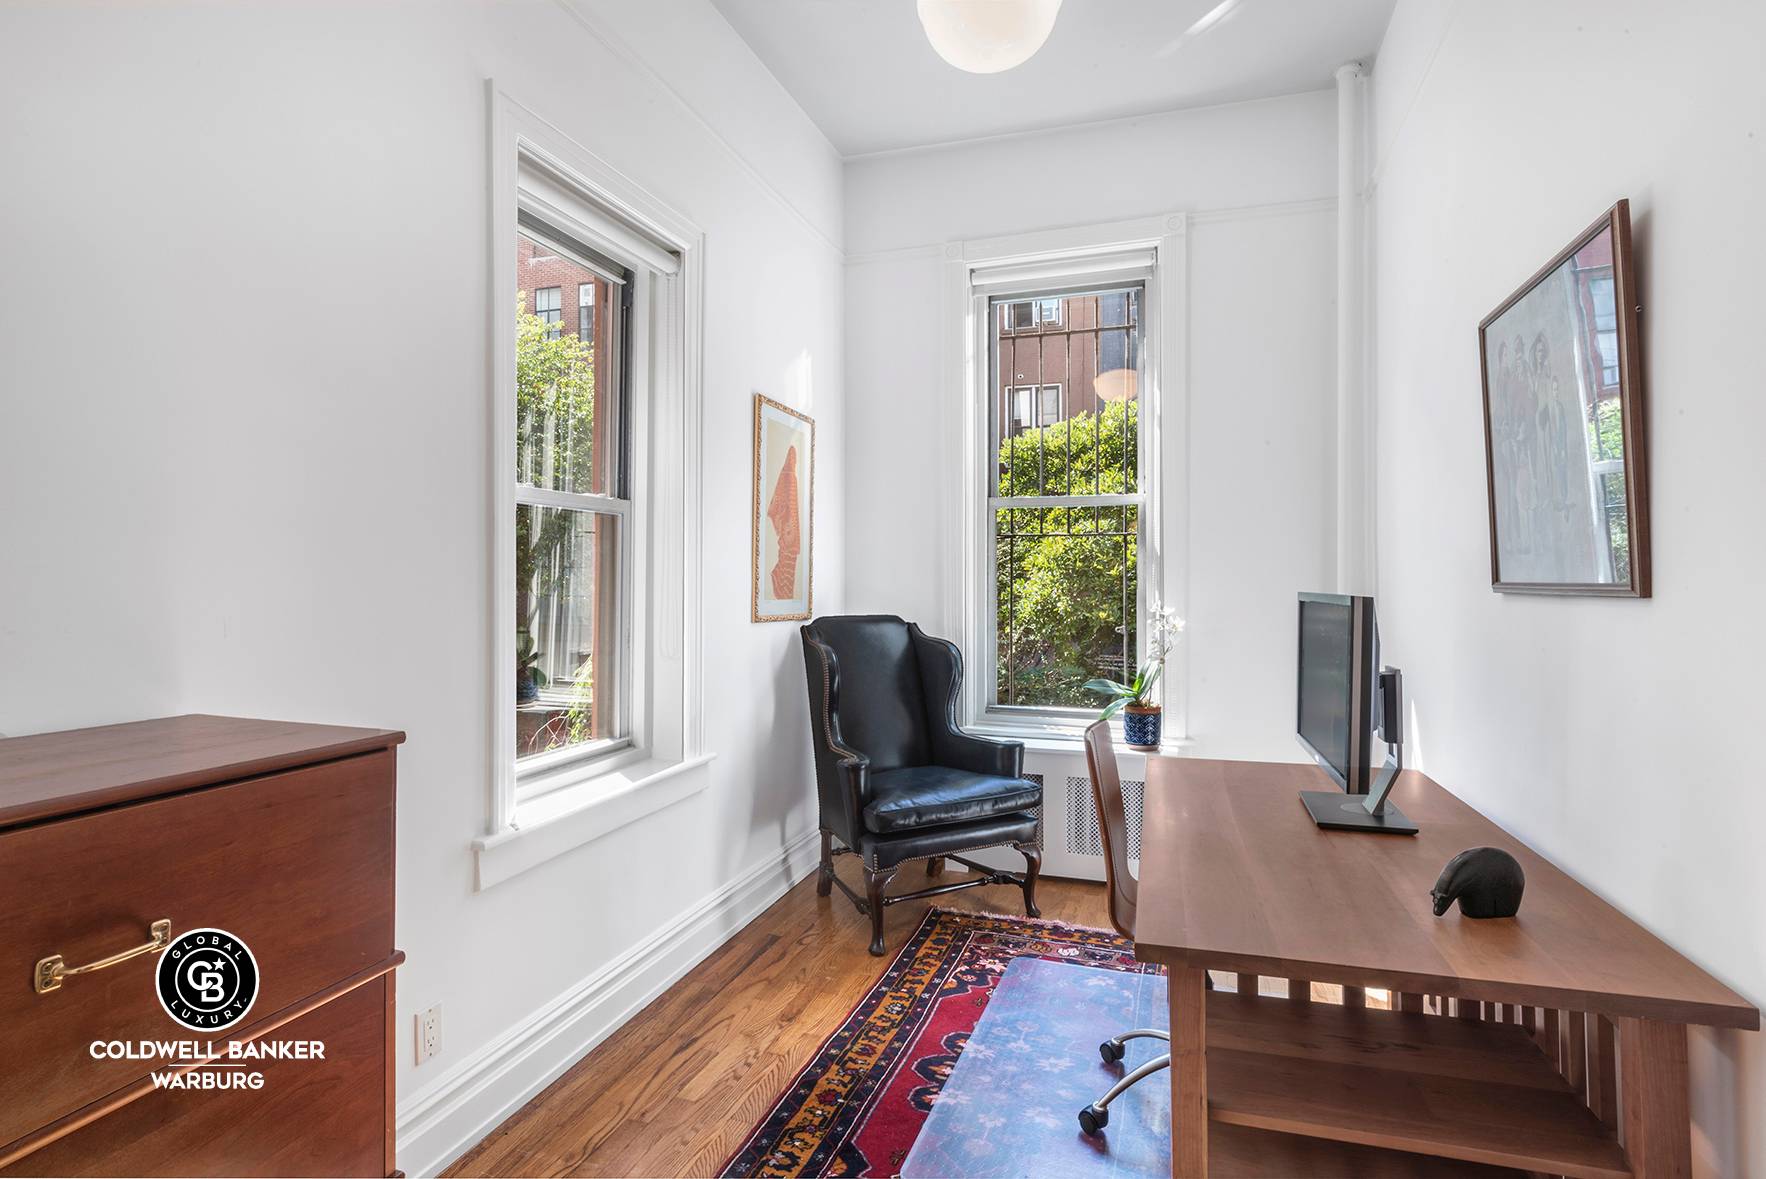 Pristine and stately, 16 West 90th Street is a two family, 21 foot wide, five story brownstone infused with history and charm.